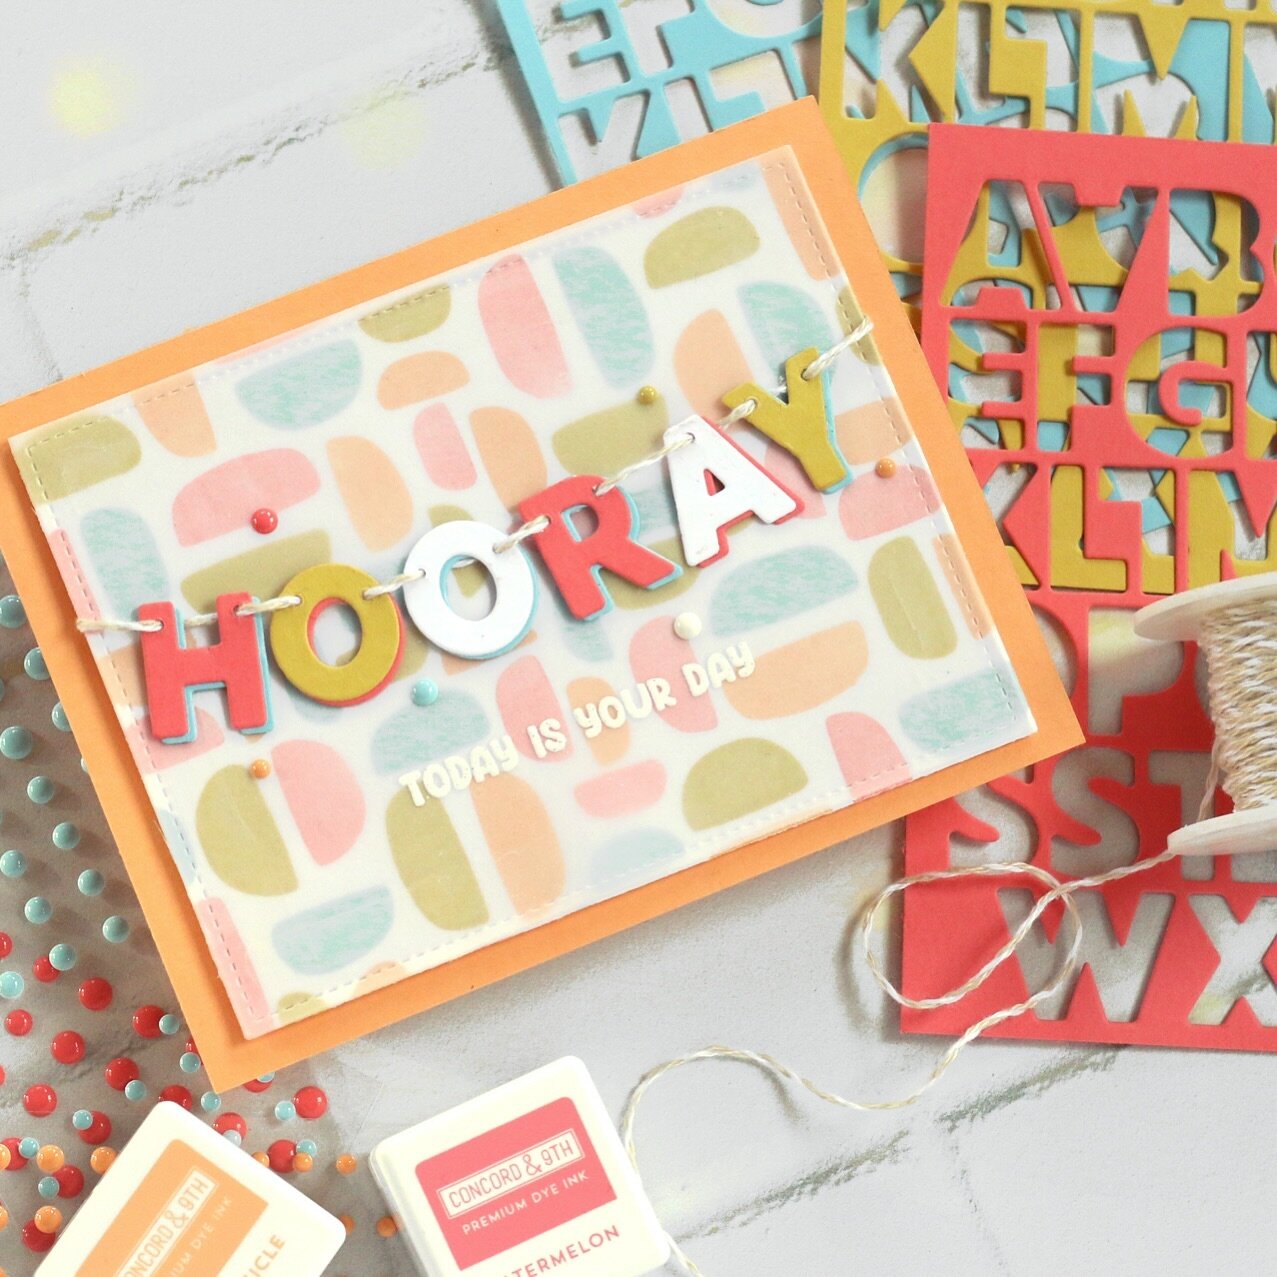 Hooray! Today @czdesign and I played a game of Knock it Off&mdash;watch the video showing this card come together now!
.
I was so inspired by one of Cathy&rsquo;s cards to create this fun design using products from @concordand9th , and yes, I actuall